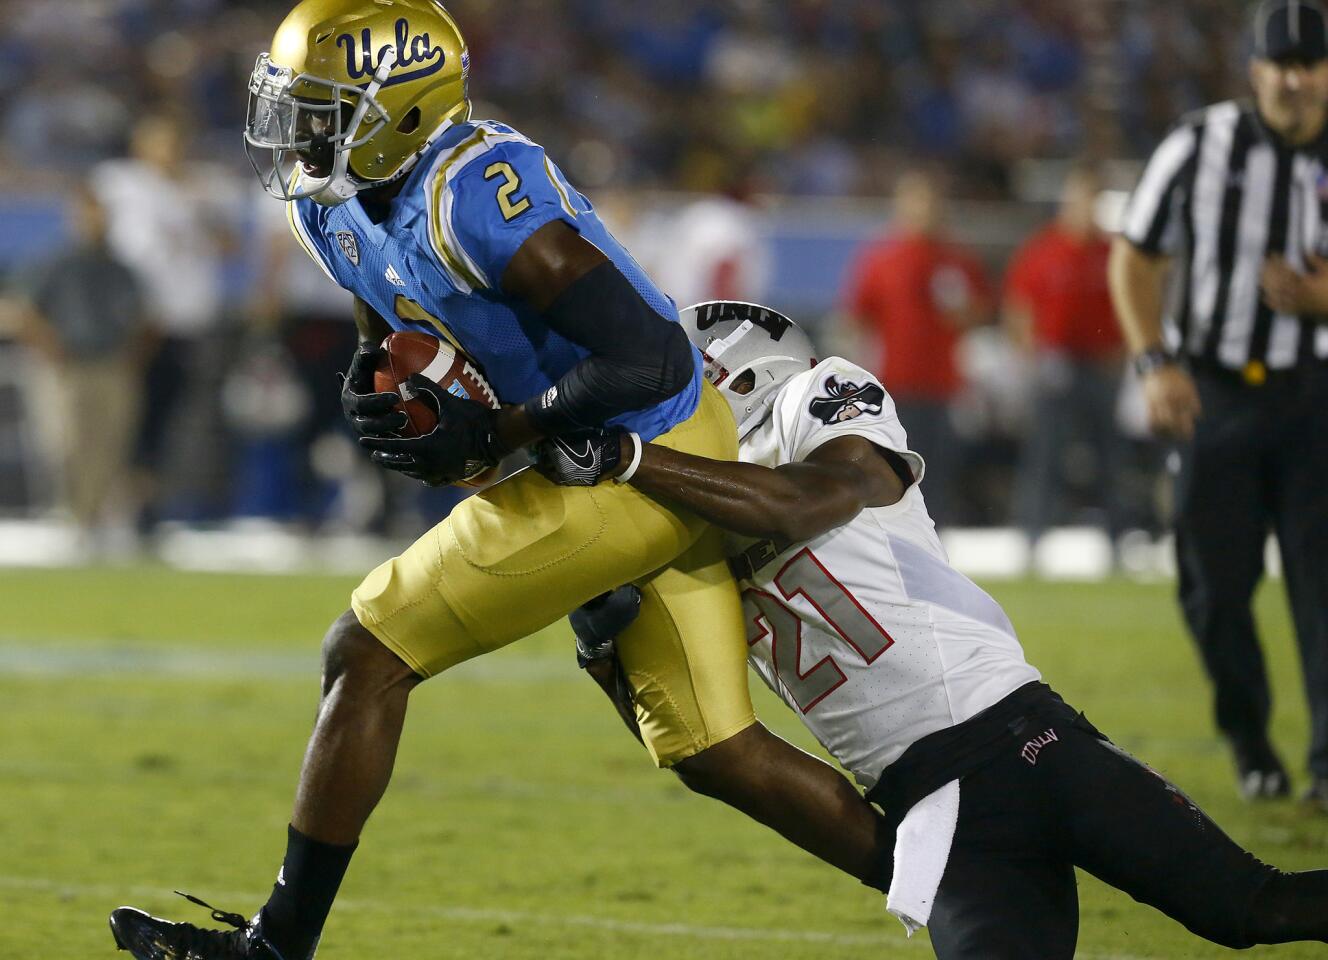 UCLA wide receiver Jordan Lasley makes a catch against UNLV defensive back Darius Moulton in the fourth quarter Sept. 10 at the Rose Bowl.